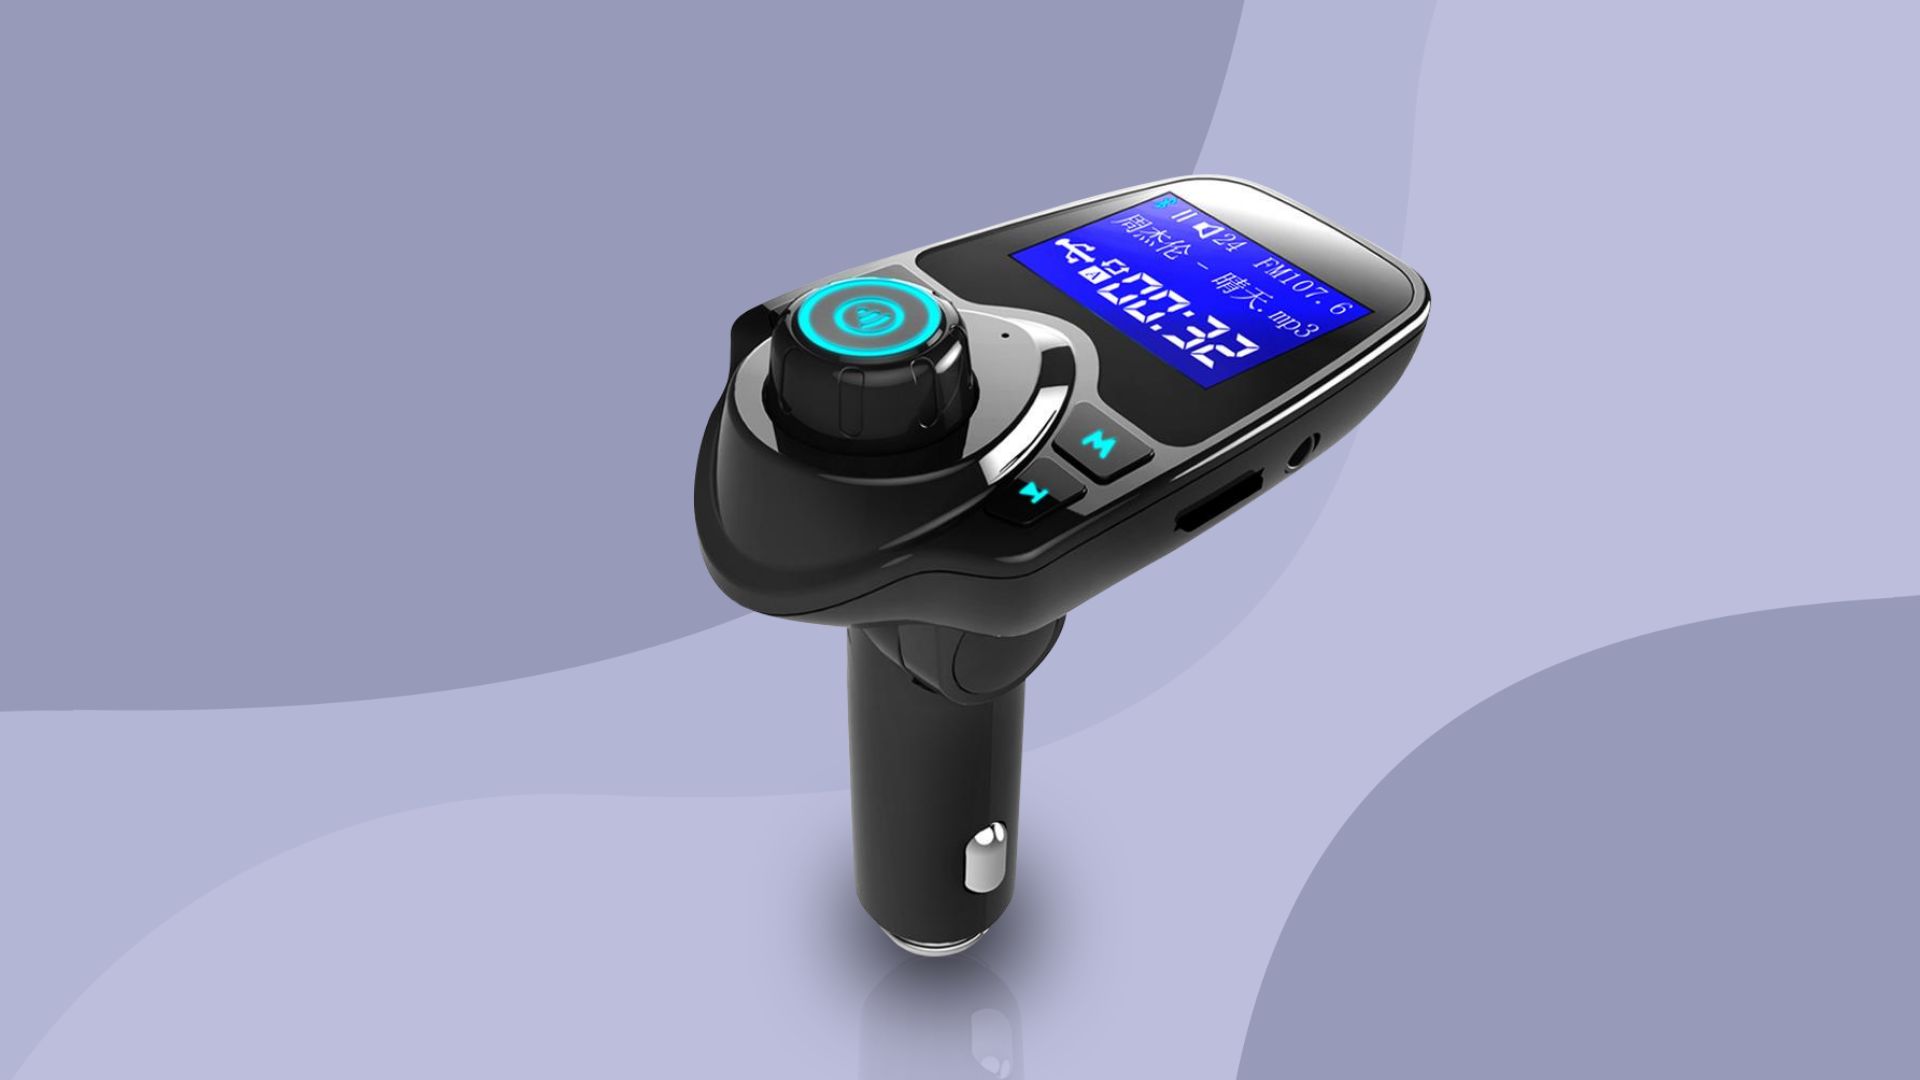 Play music from iPhone to the car using an FM transmitter